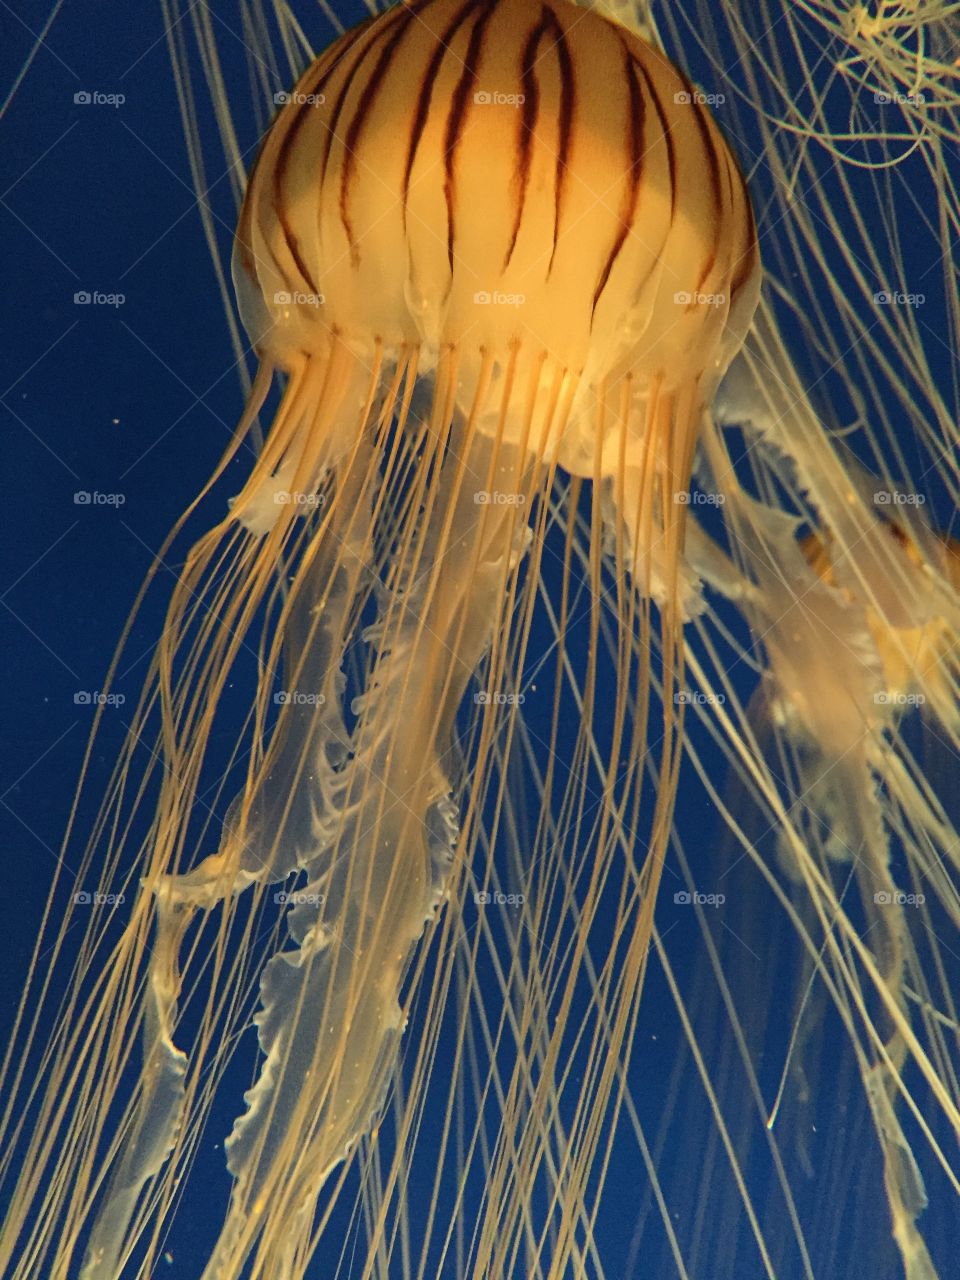 Jellyfish. Shot this while on vacation this summer.